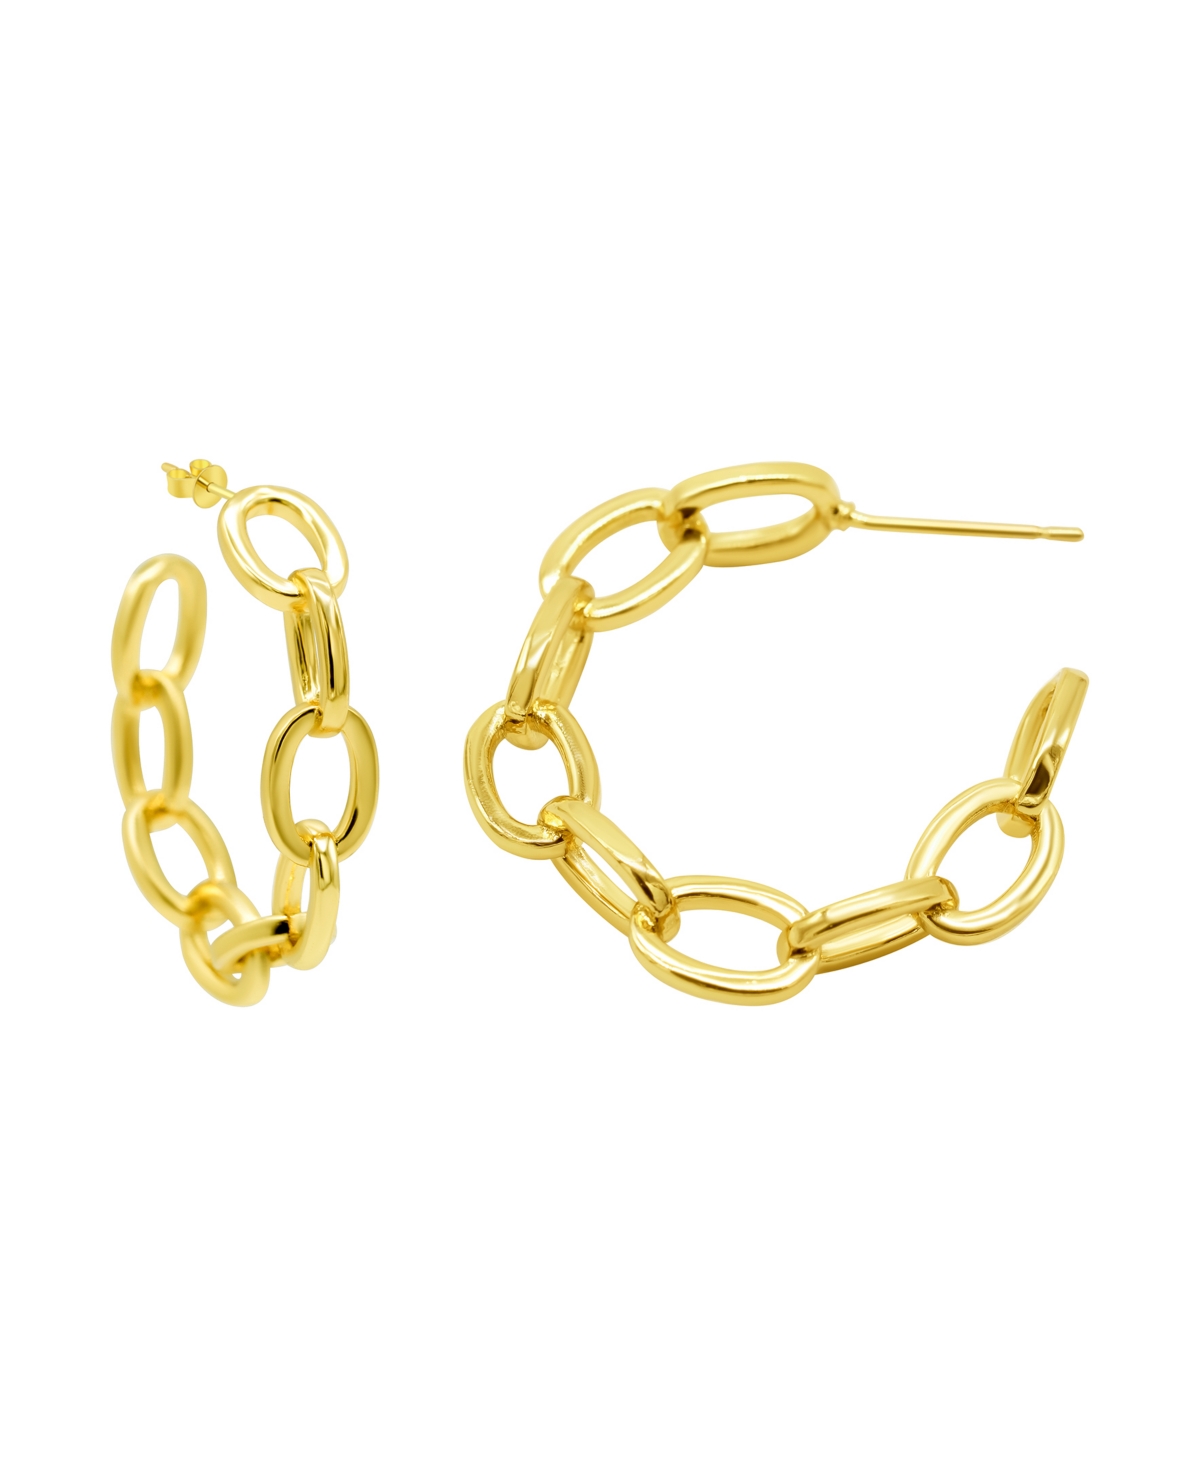 Shop Adornia 14k Gold-plated Chain Link Hoop Earrings